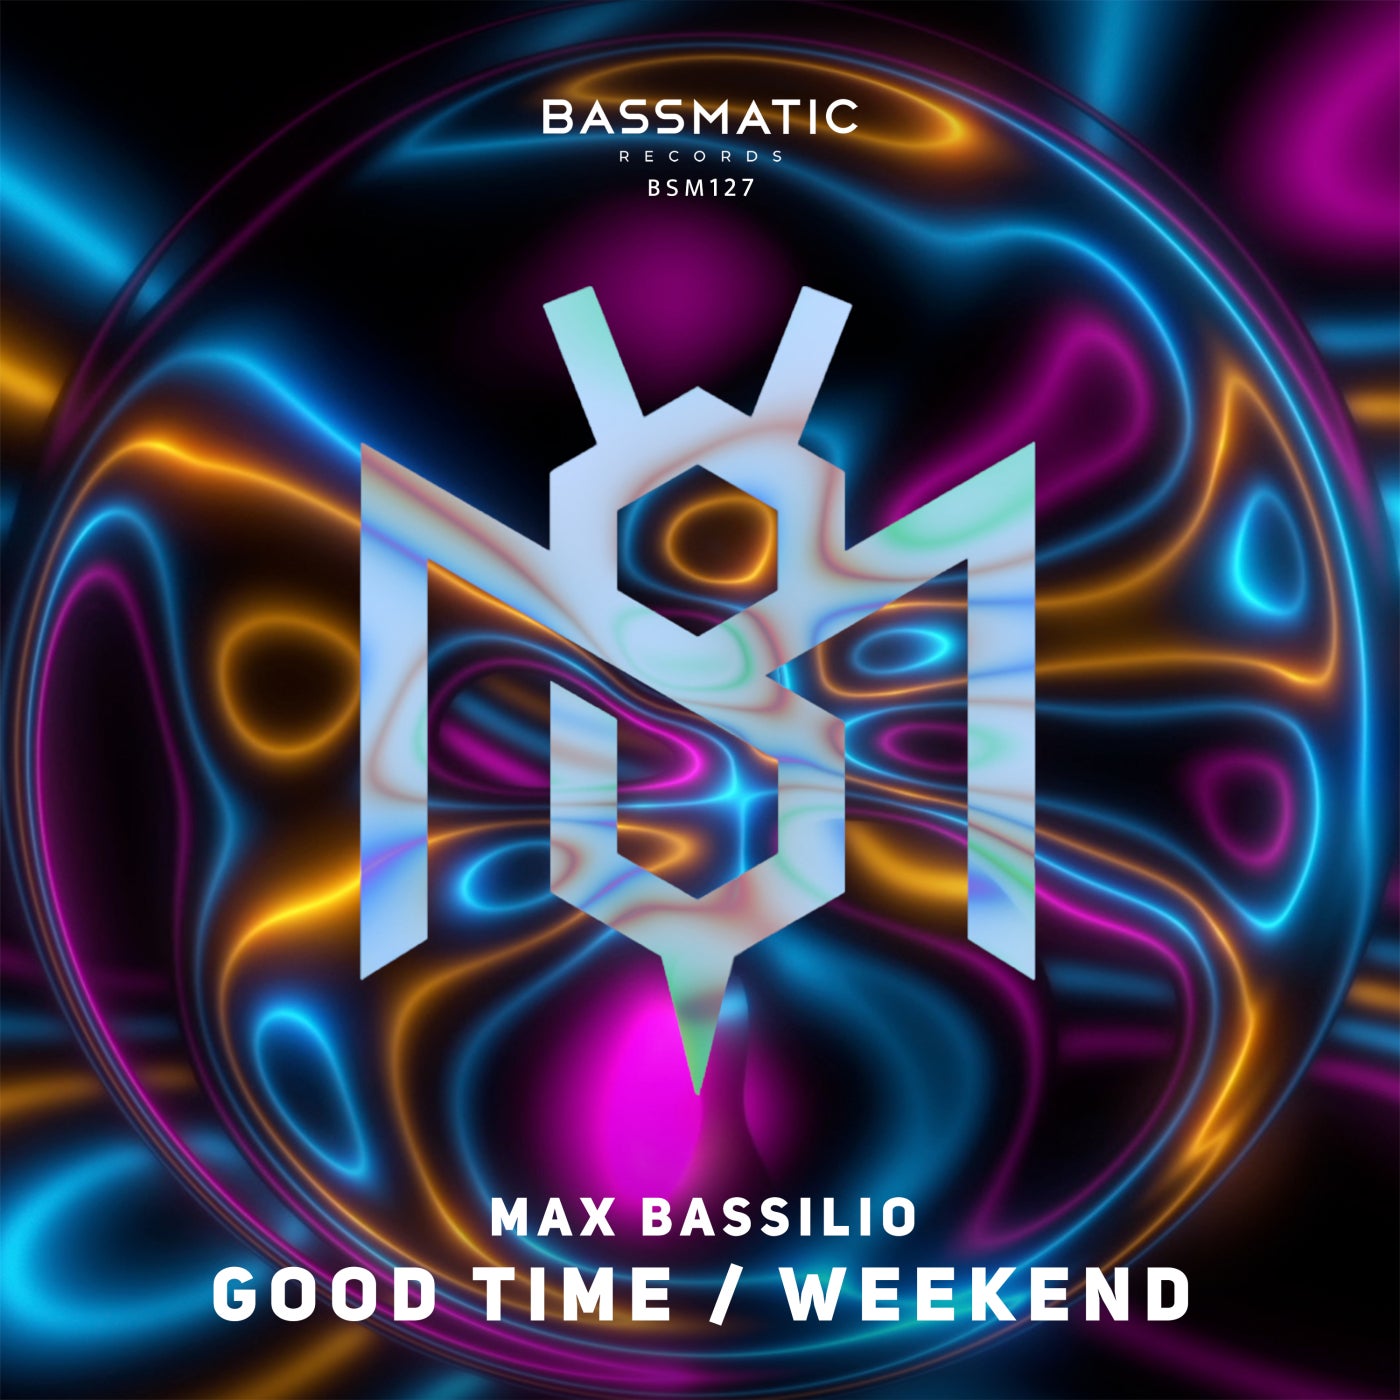 image cover: Max Bassilio - Good Time / Weekend on Bassmatic records